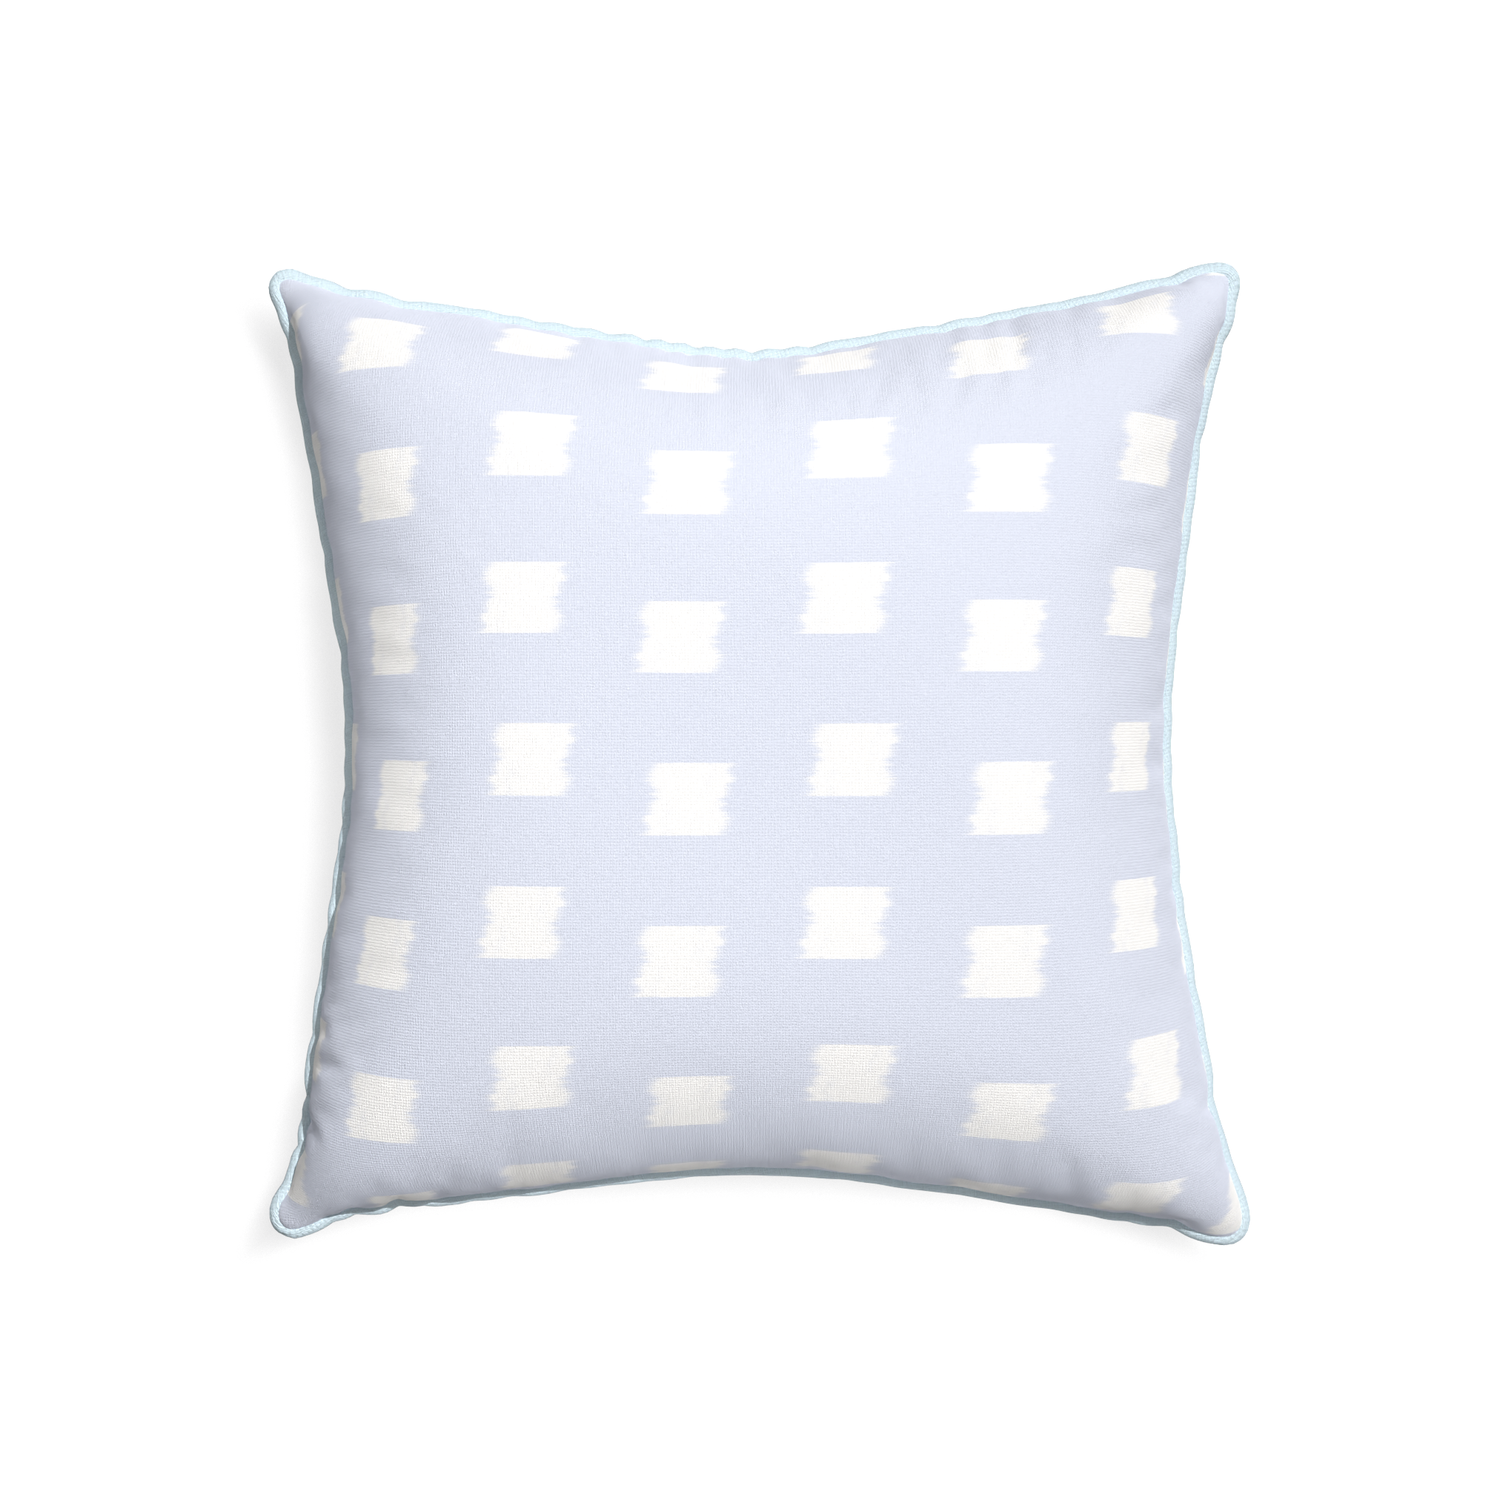 22-square denton custom pillow with powder piping on white background